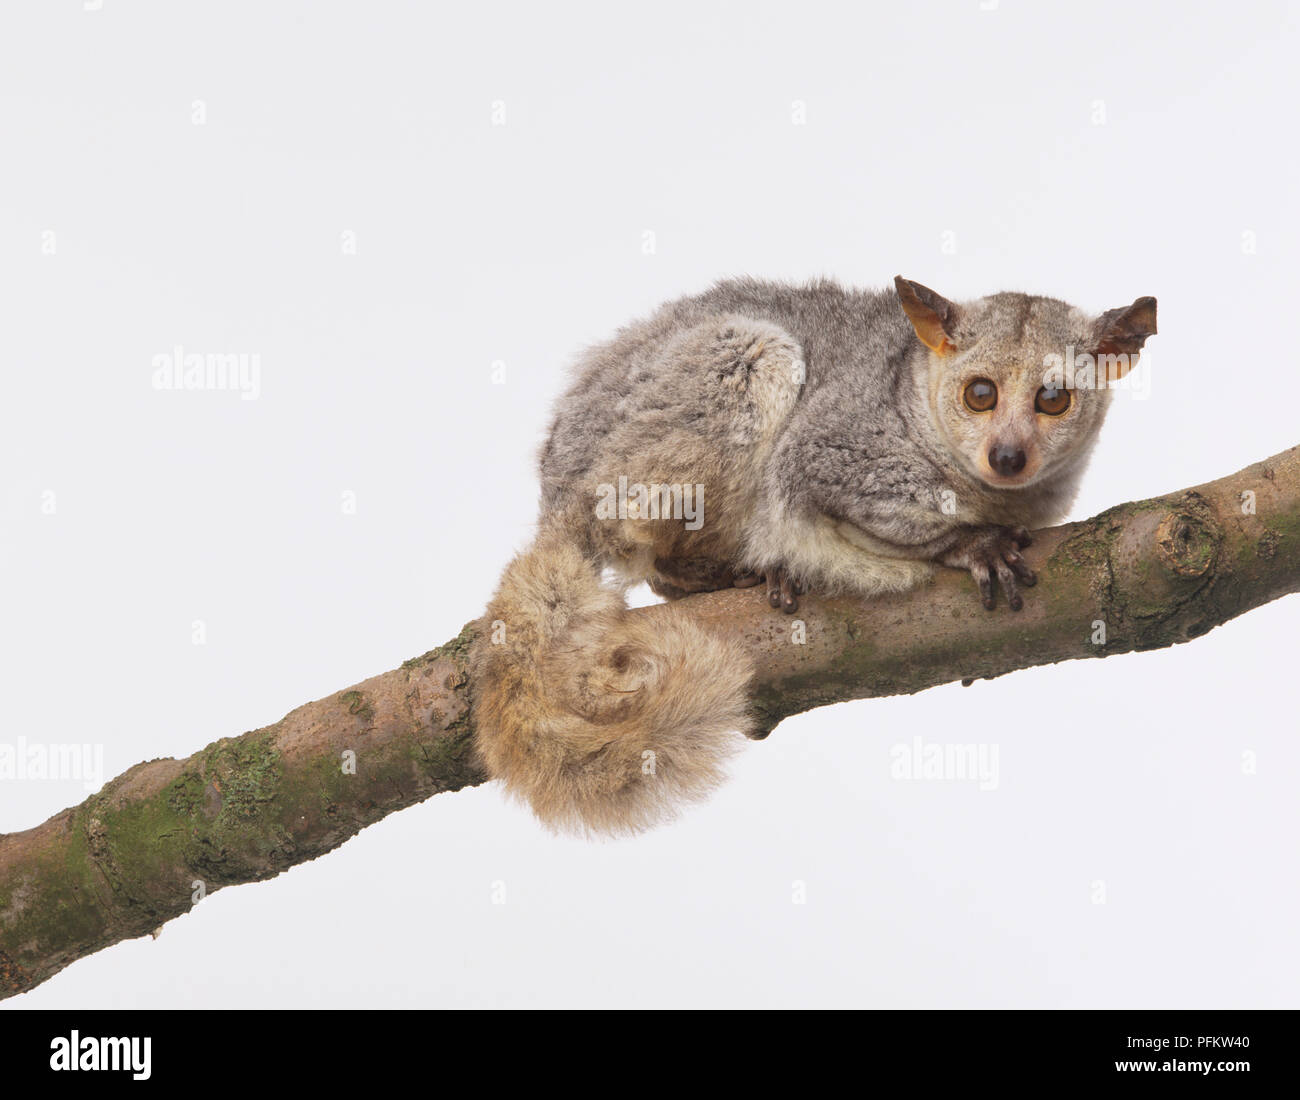 Thick-tailed Galago or Bushbaby (galago crassicaudatus) perched on tree branch Stock Photo